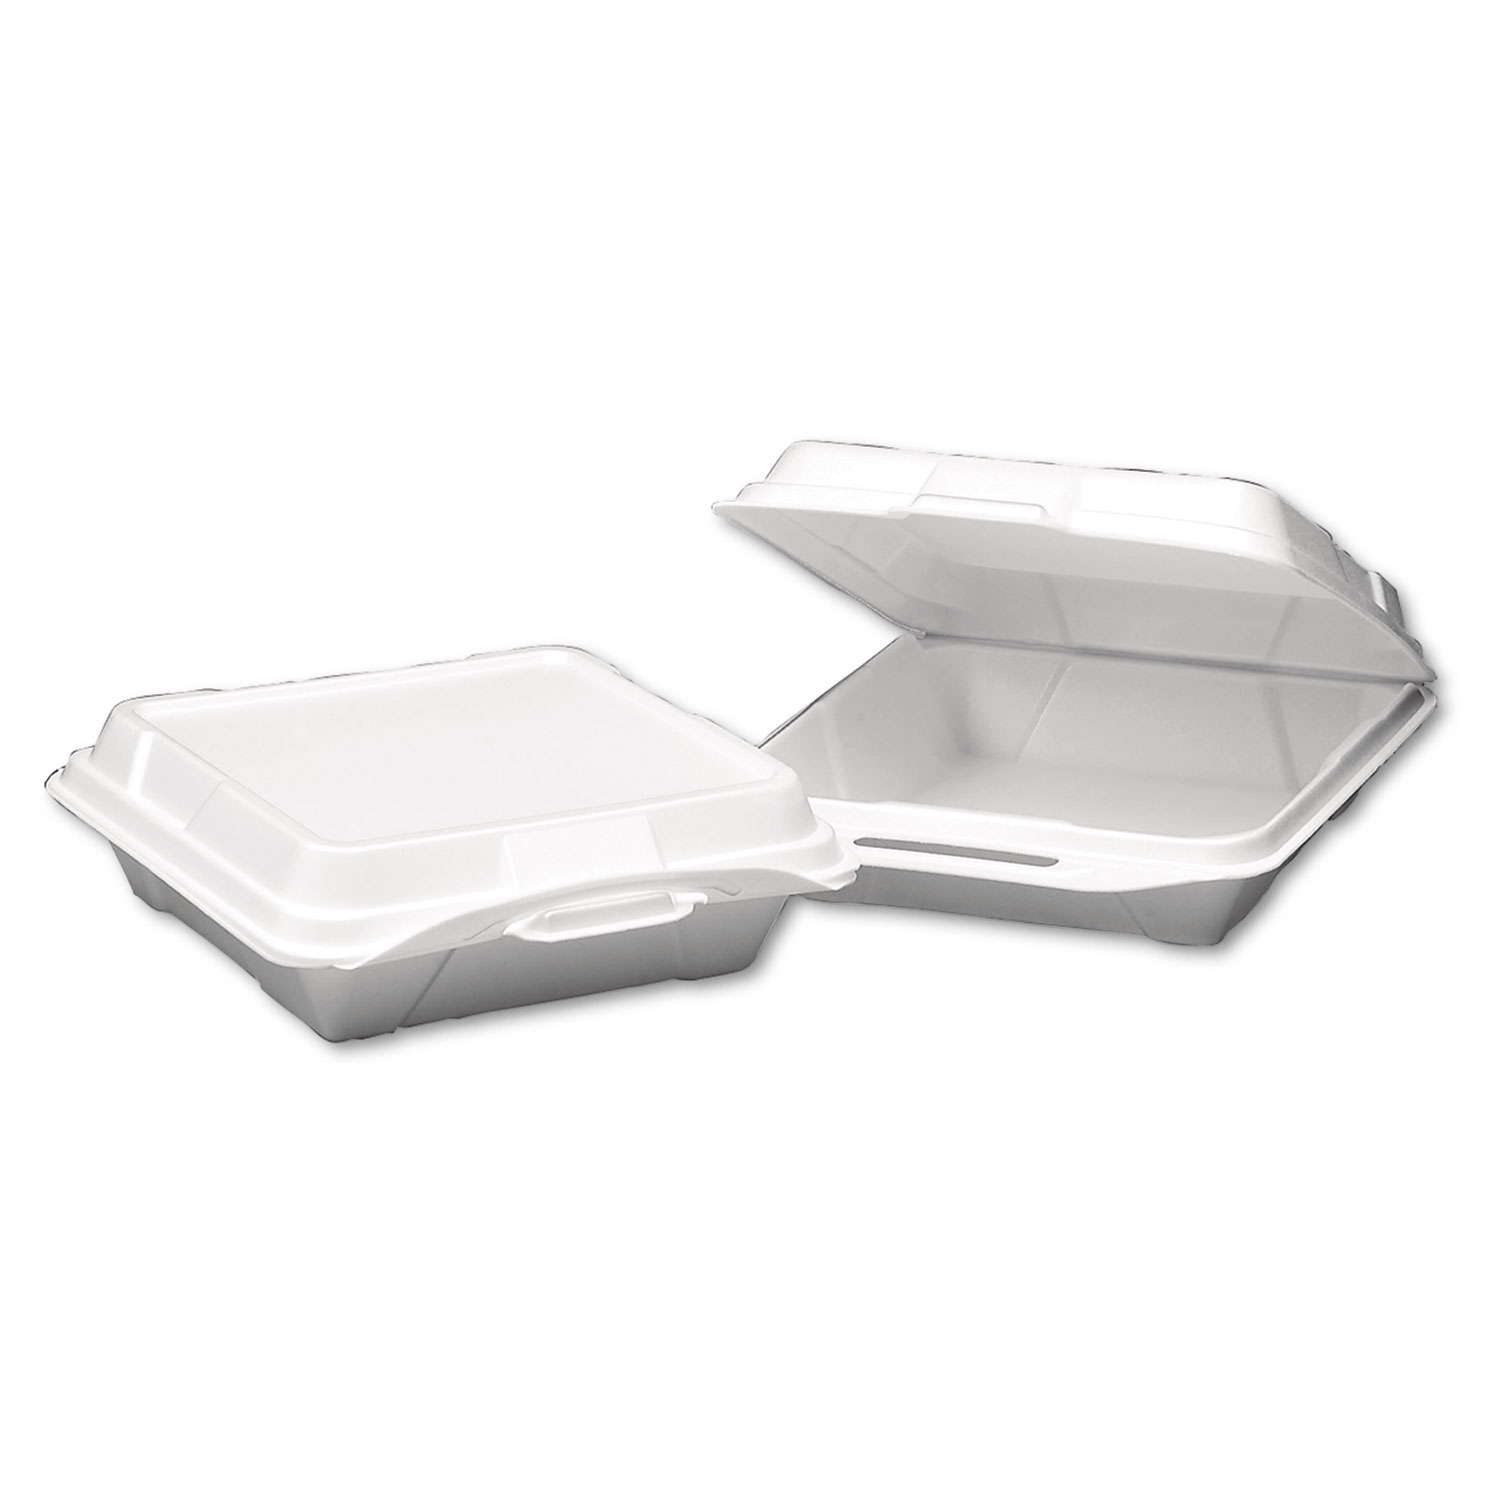  Genpak 20010--- Foam Hinged Carryout Container, 1-Compartment, 9-1/4x9-1/4x3, White, 100/Bag (GNP20010) 